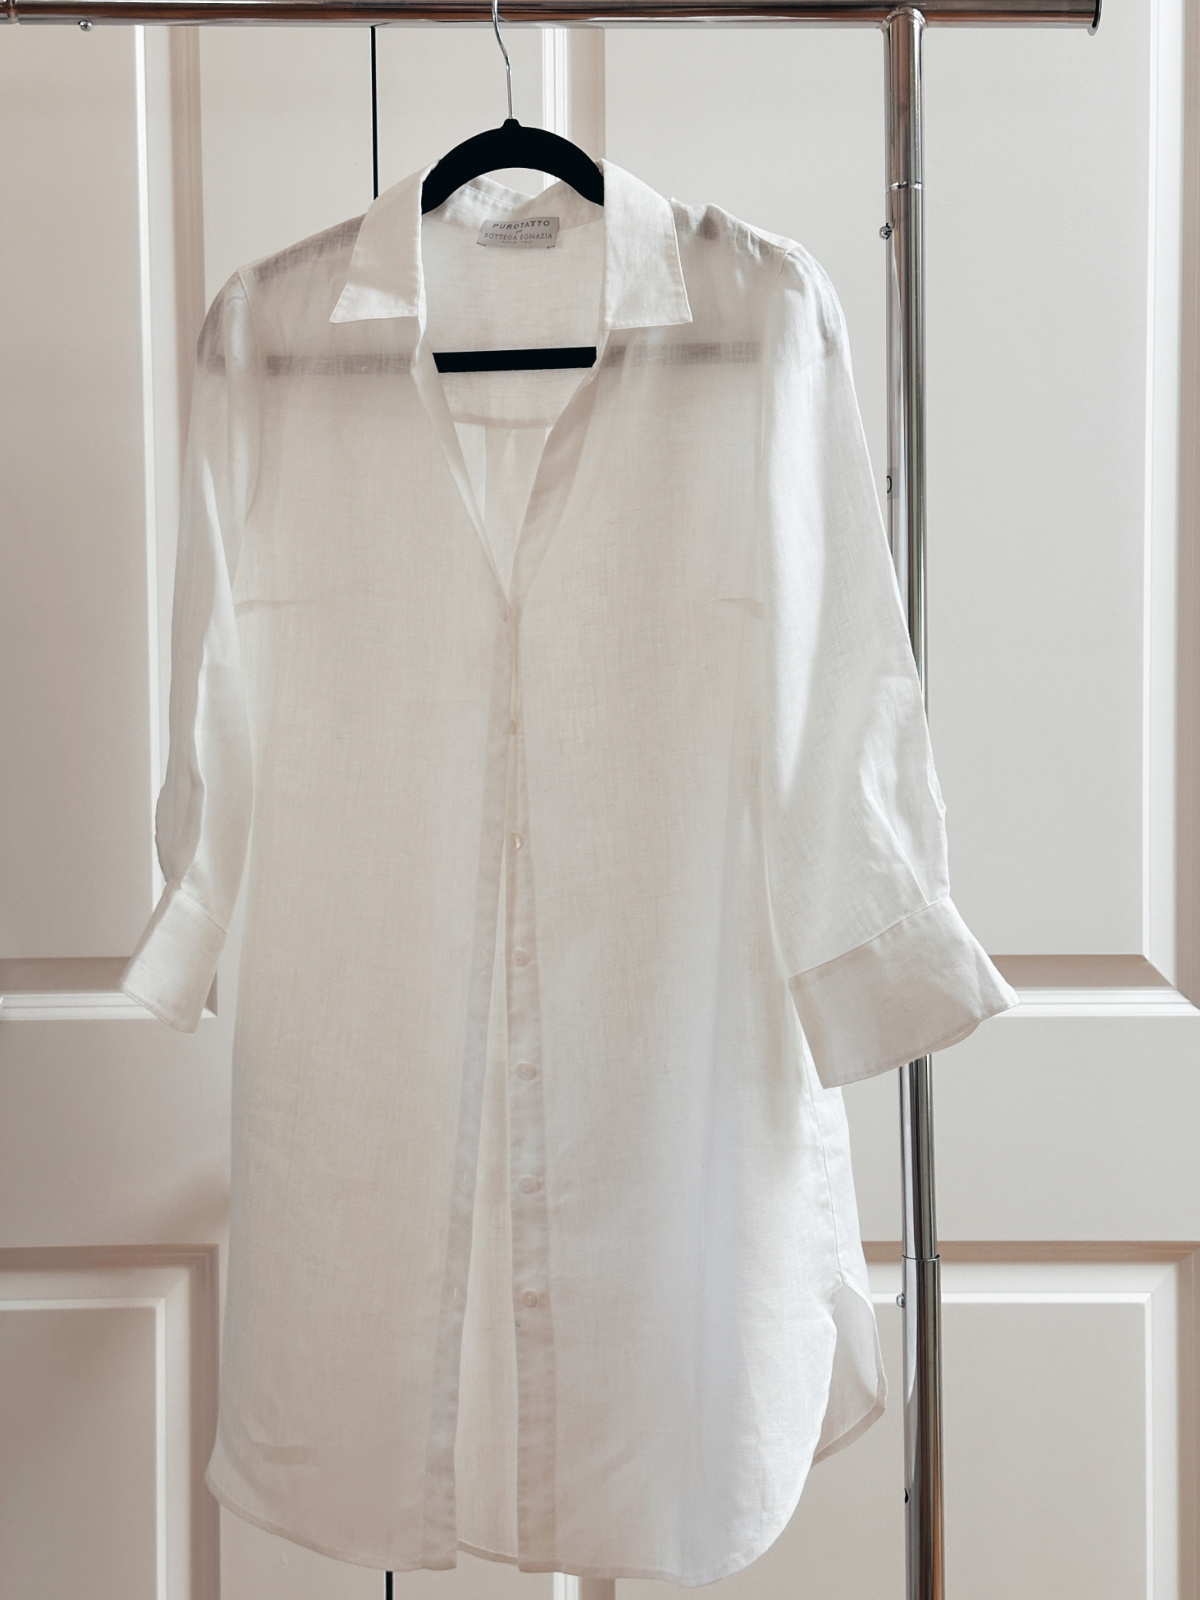 Oversized Linen shirt made in Italy.